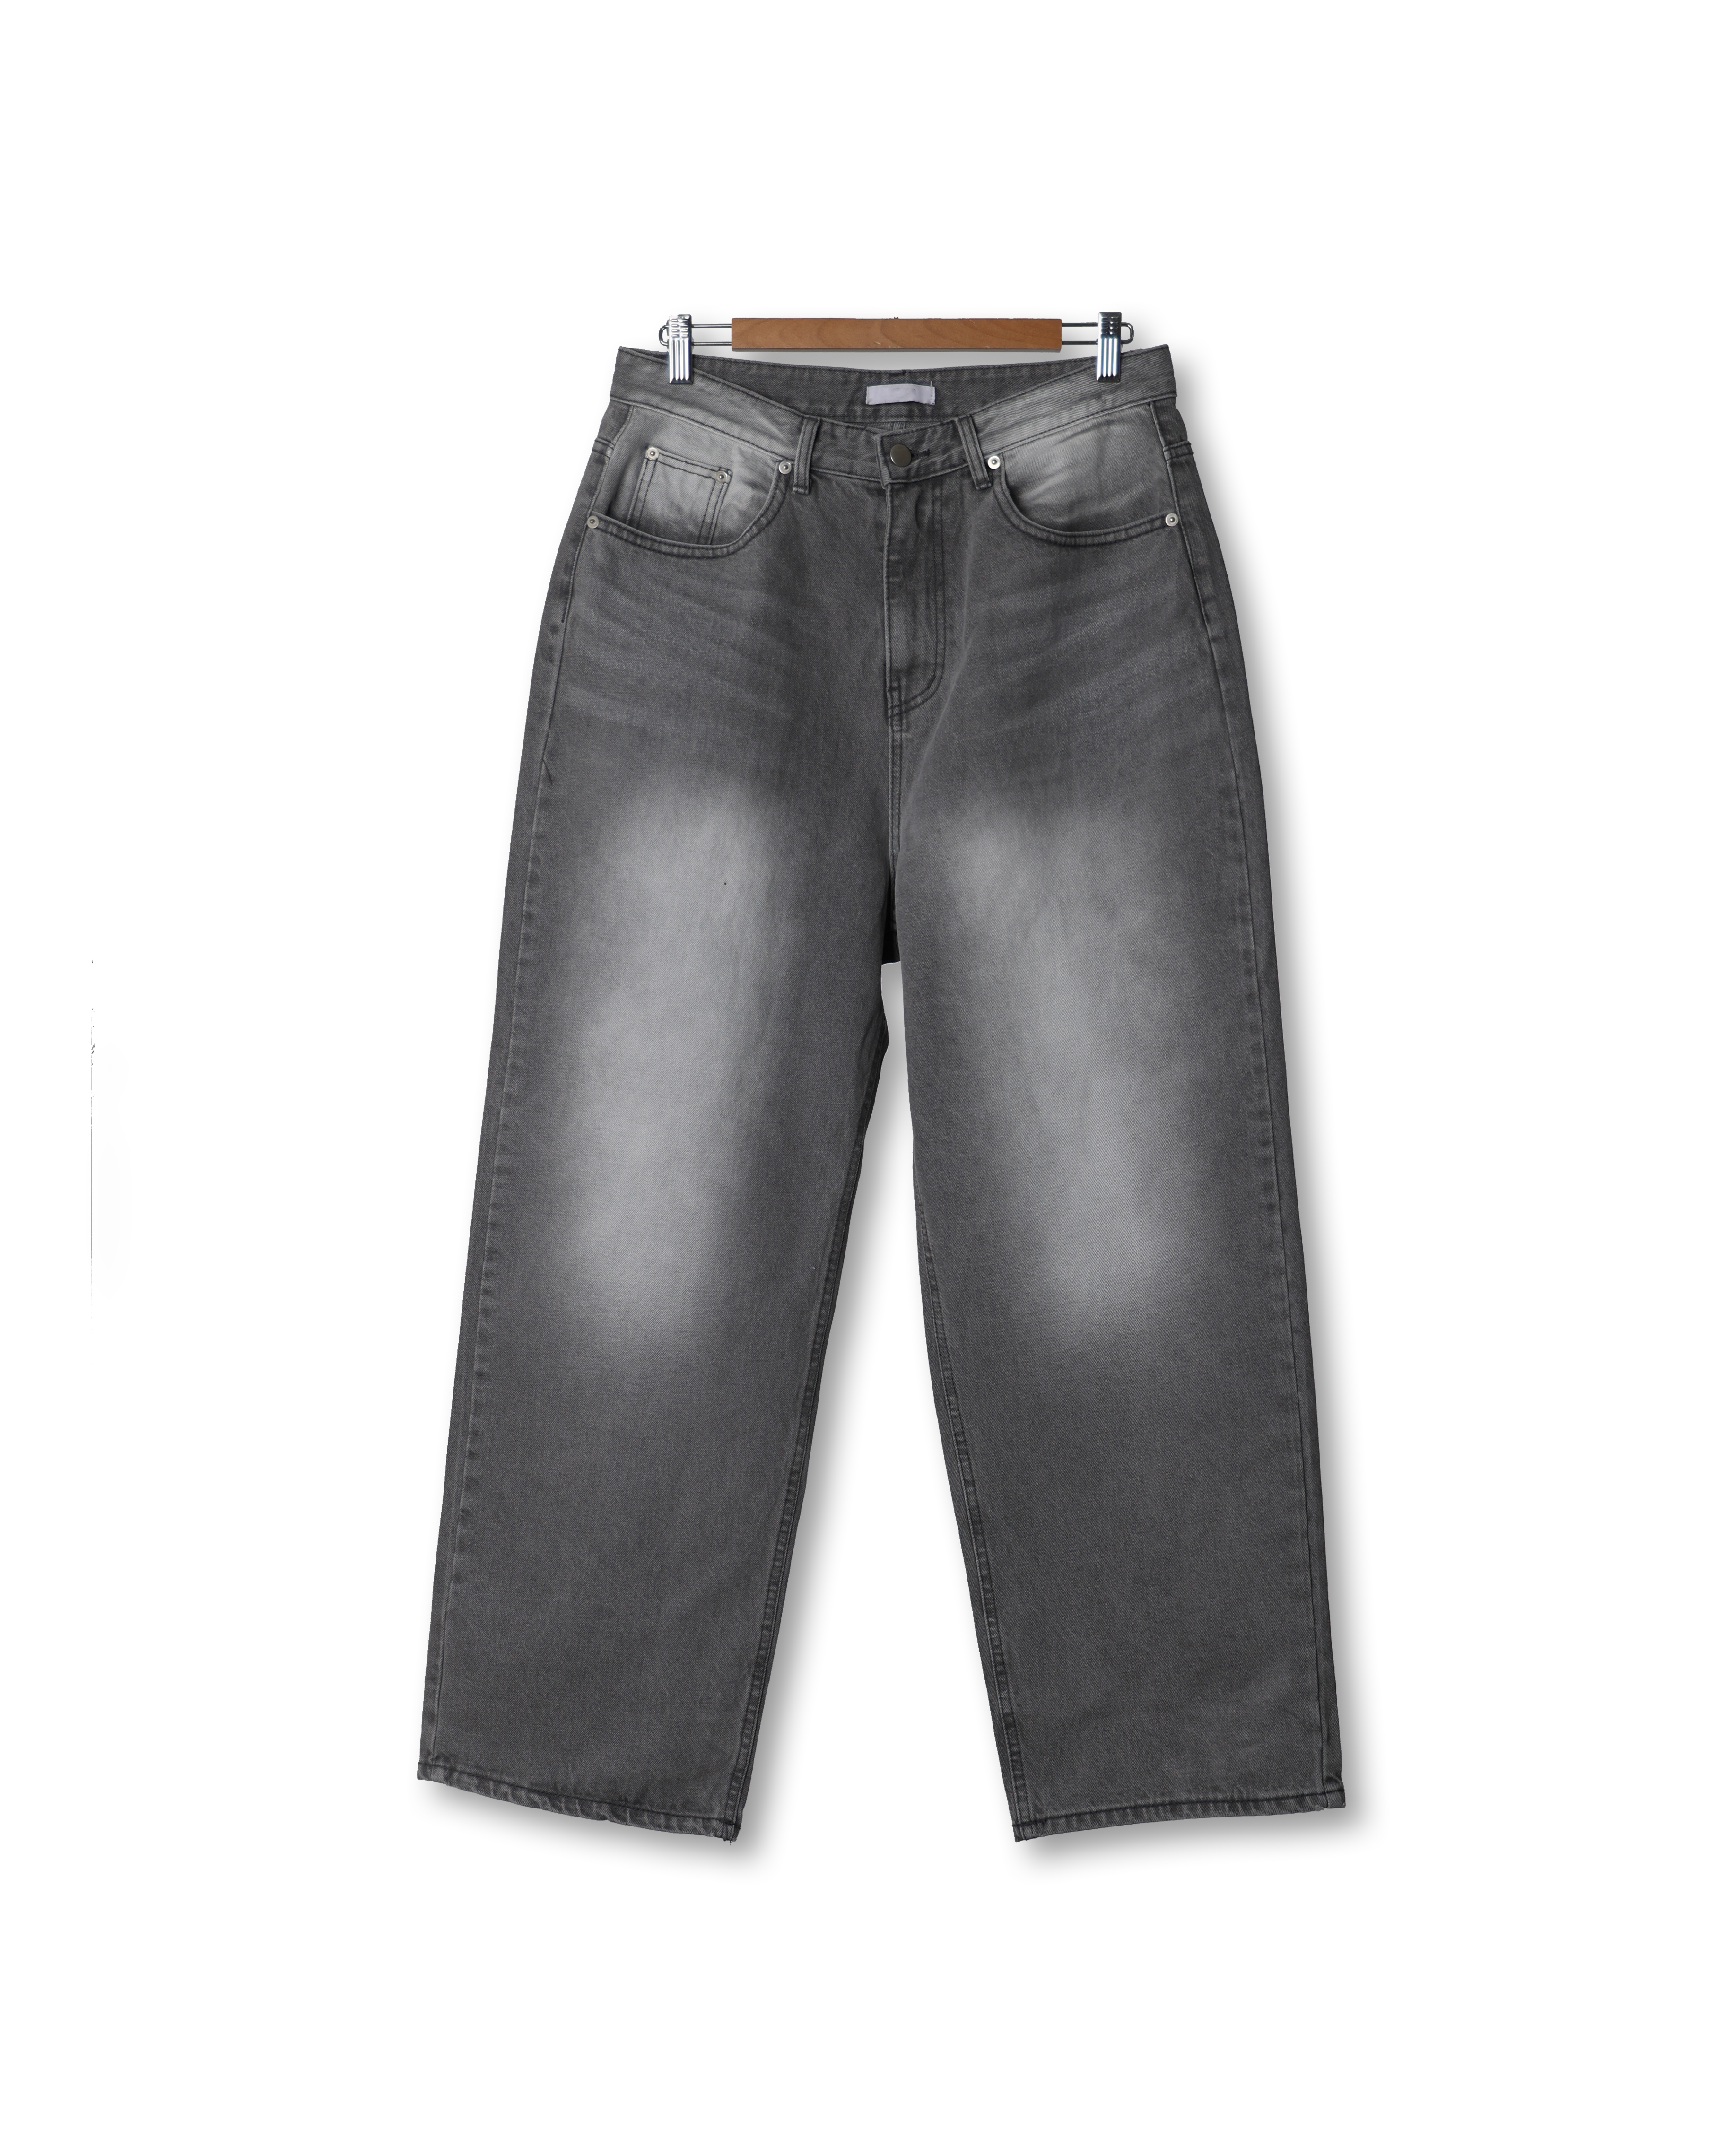 NOSTR 107 Wide Daily Washed Jean (Gray Denim)